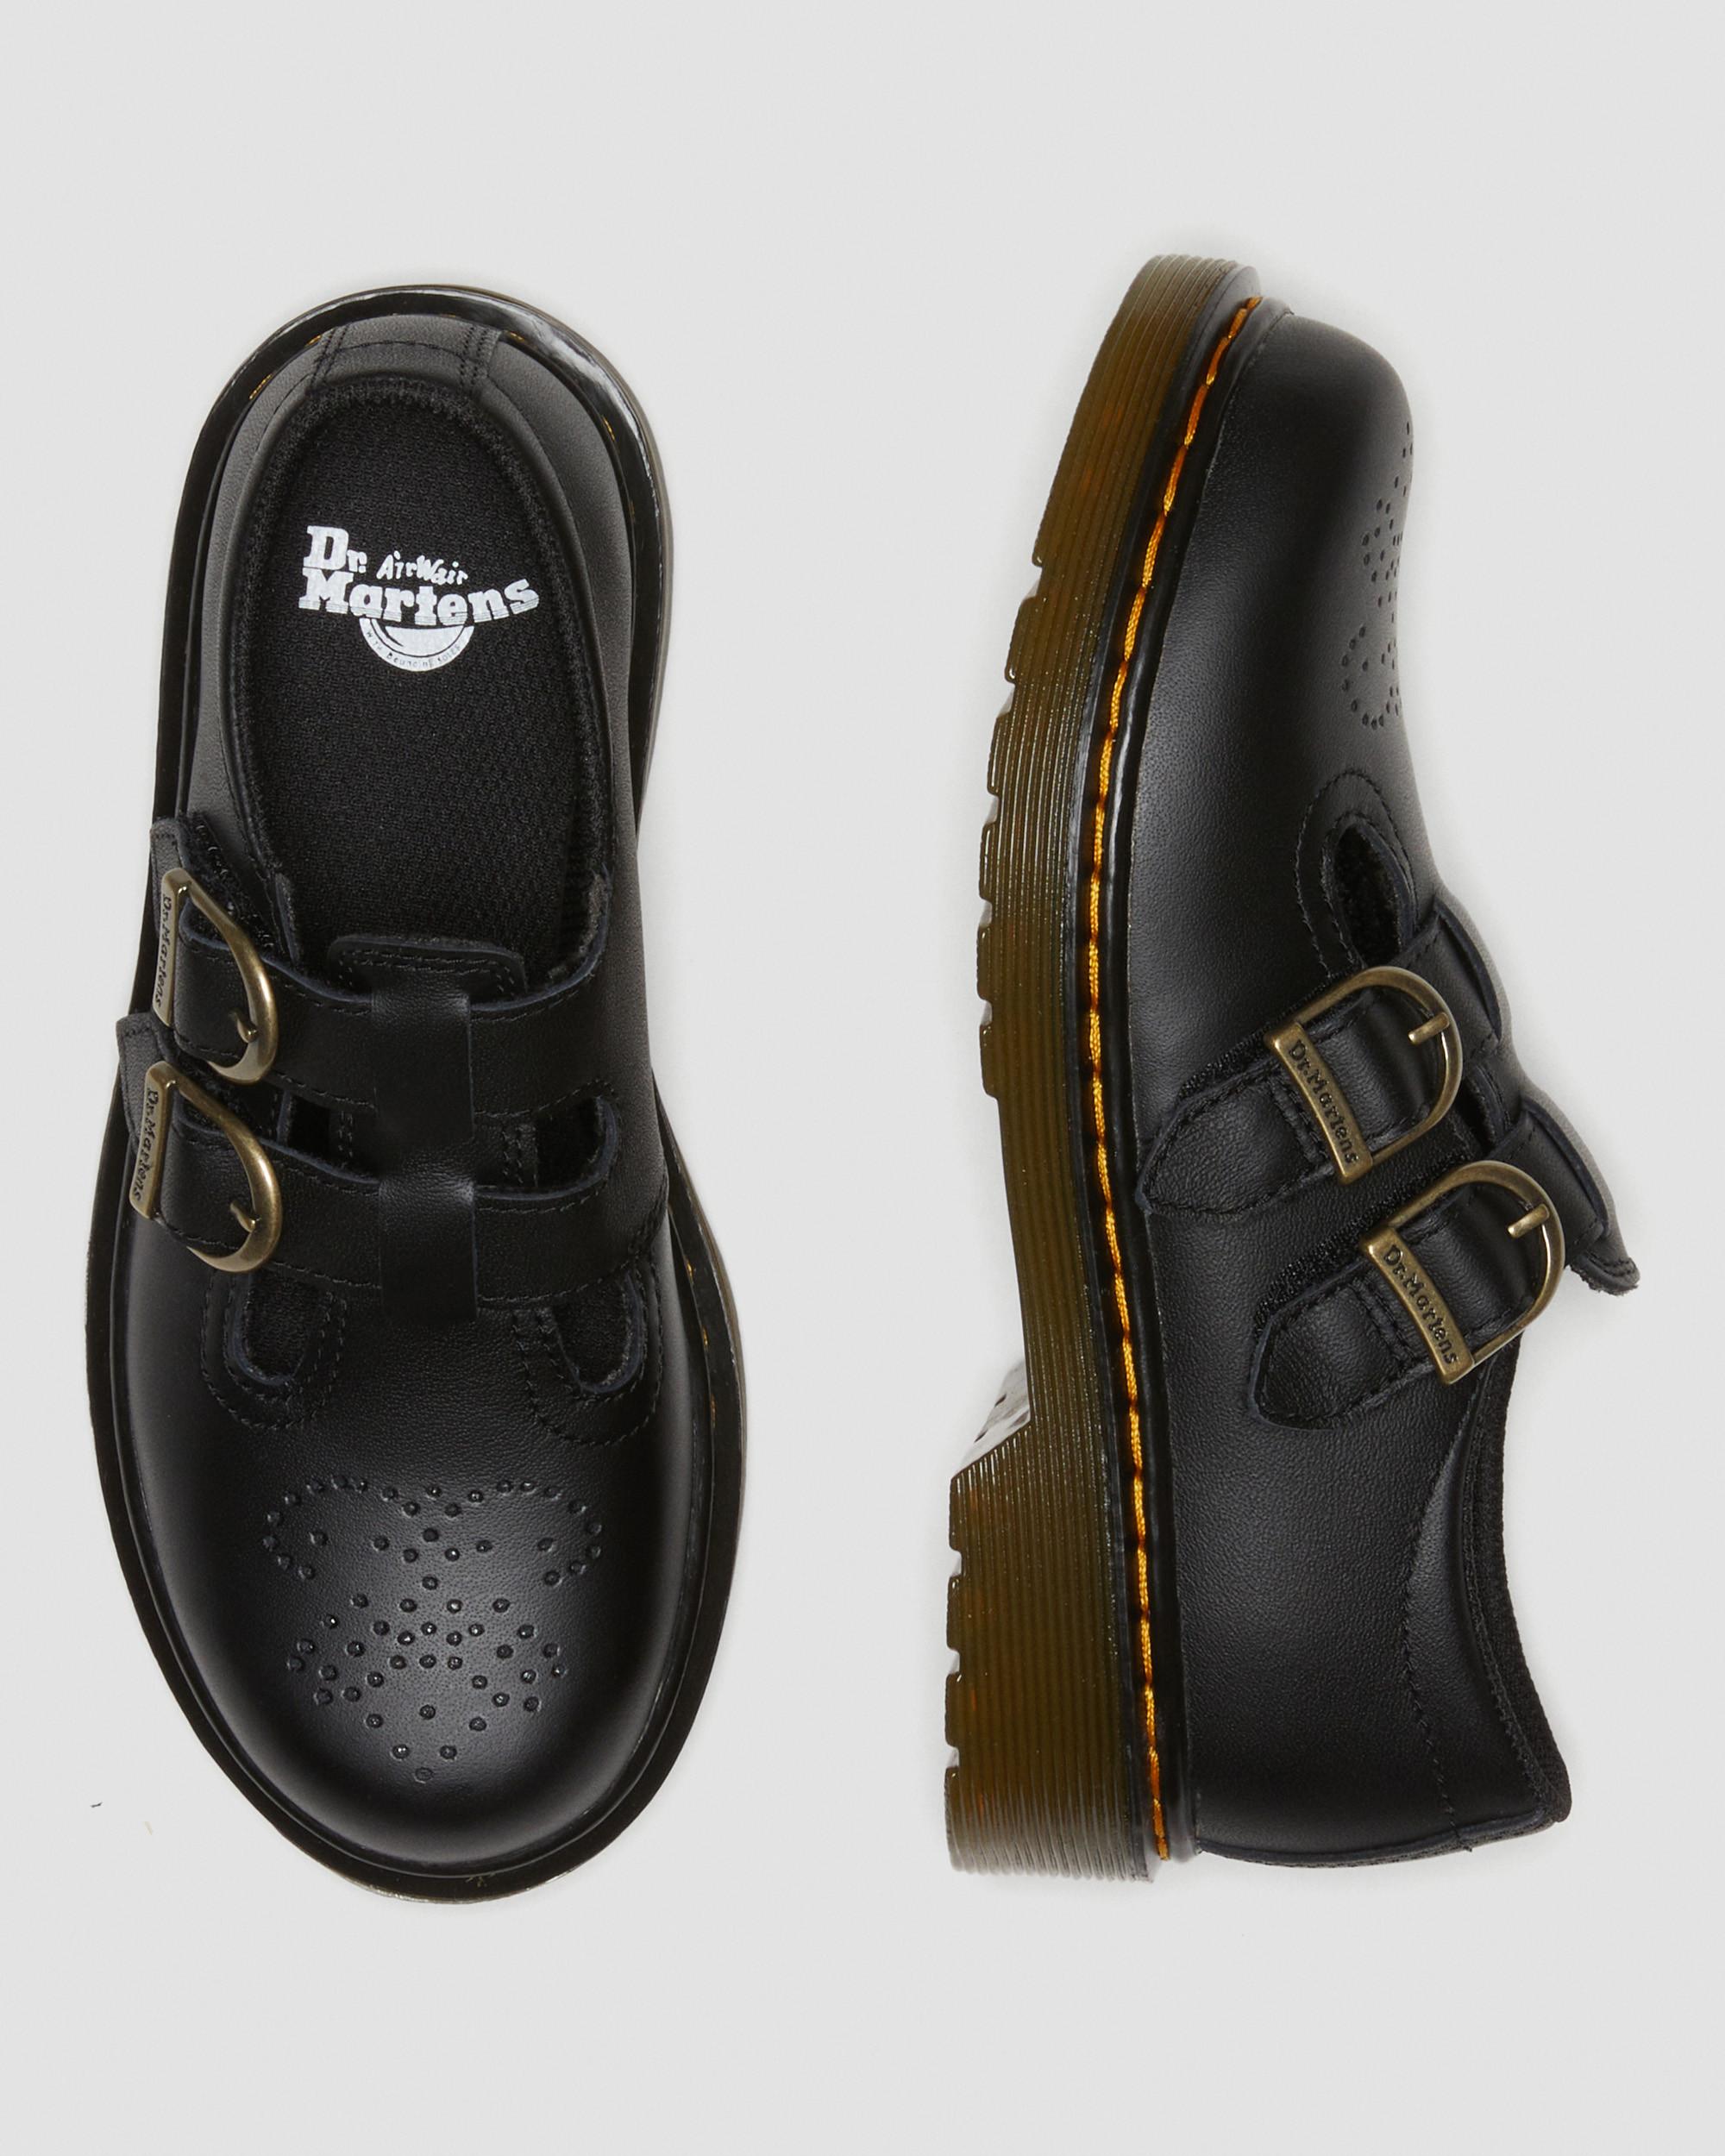 Junior 8065 Softy T Leather Mary Jane Shoes | Dr. Martens